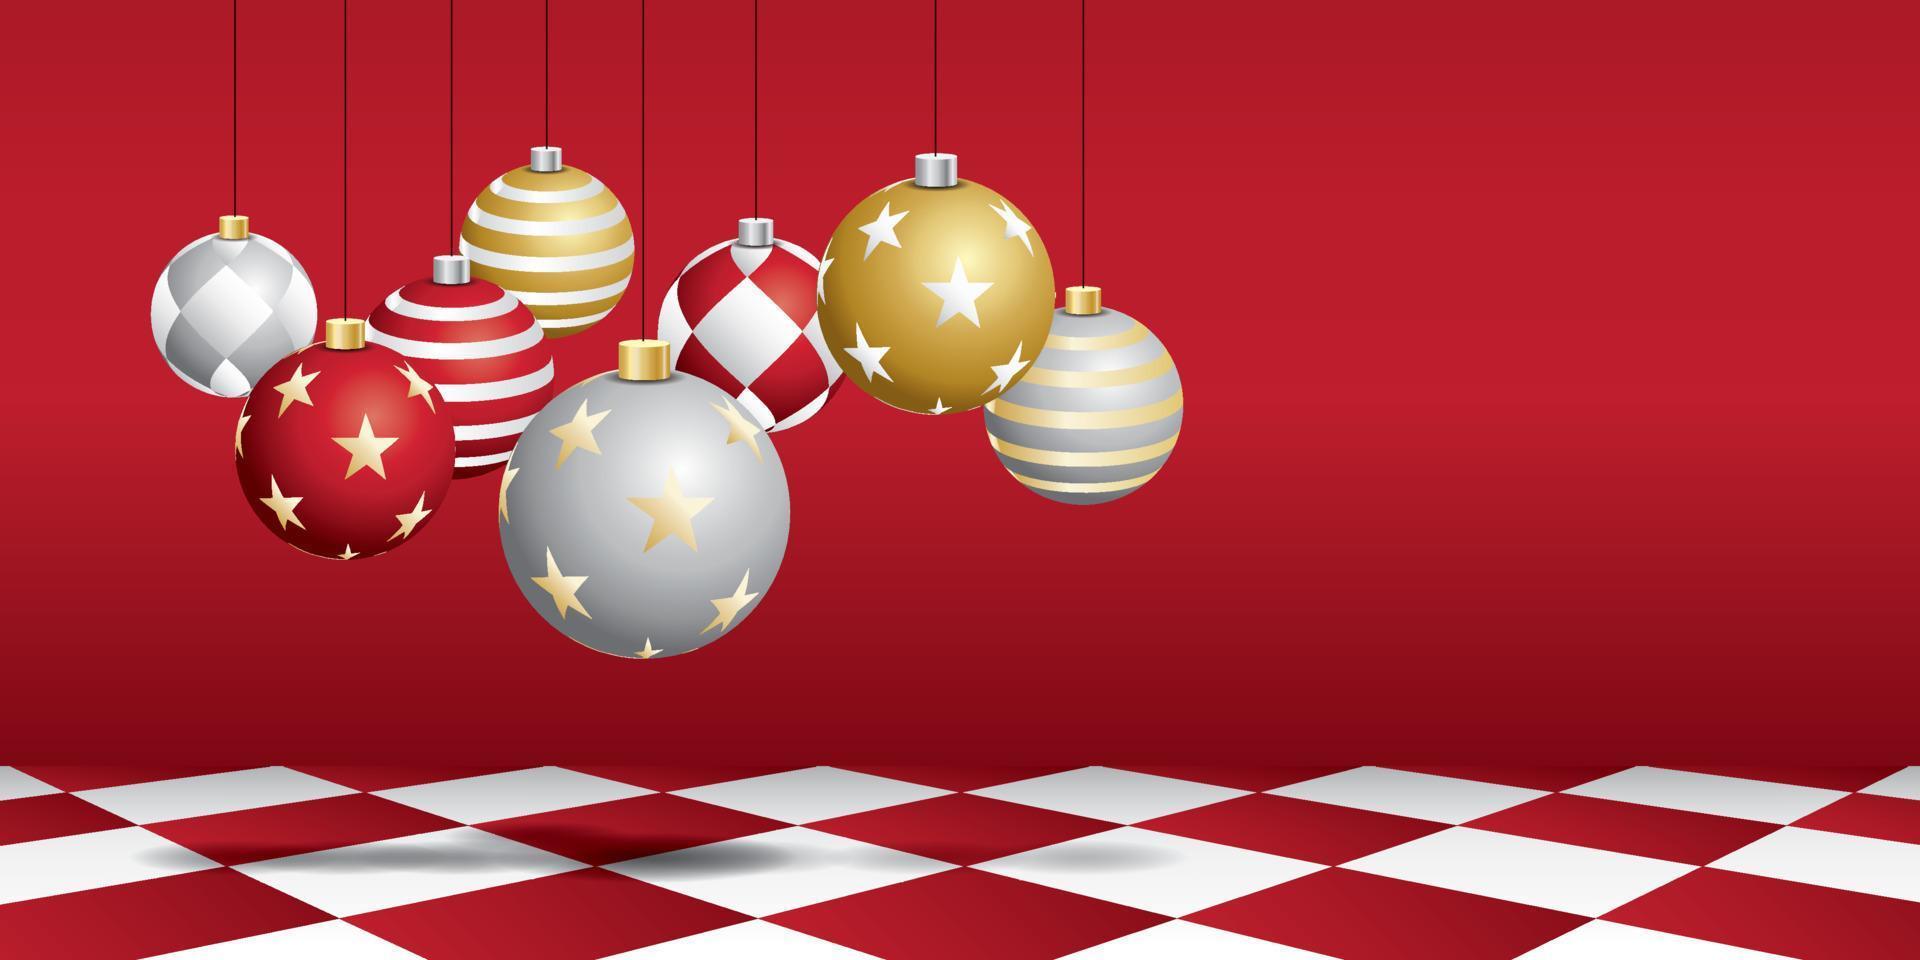 Set of Christmas balls with red wall and red chess floor. Christmas scene vector. vector